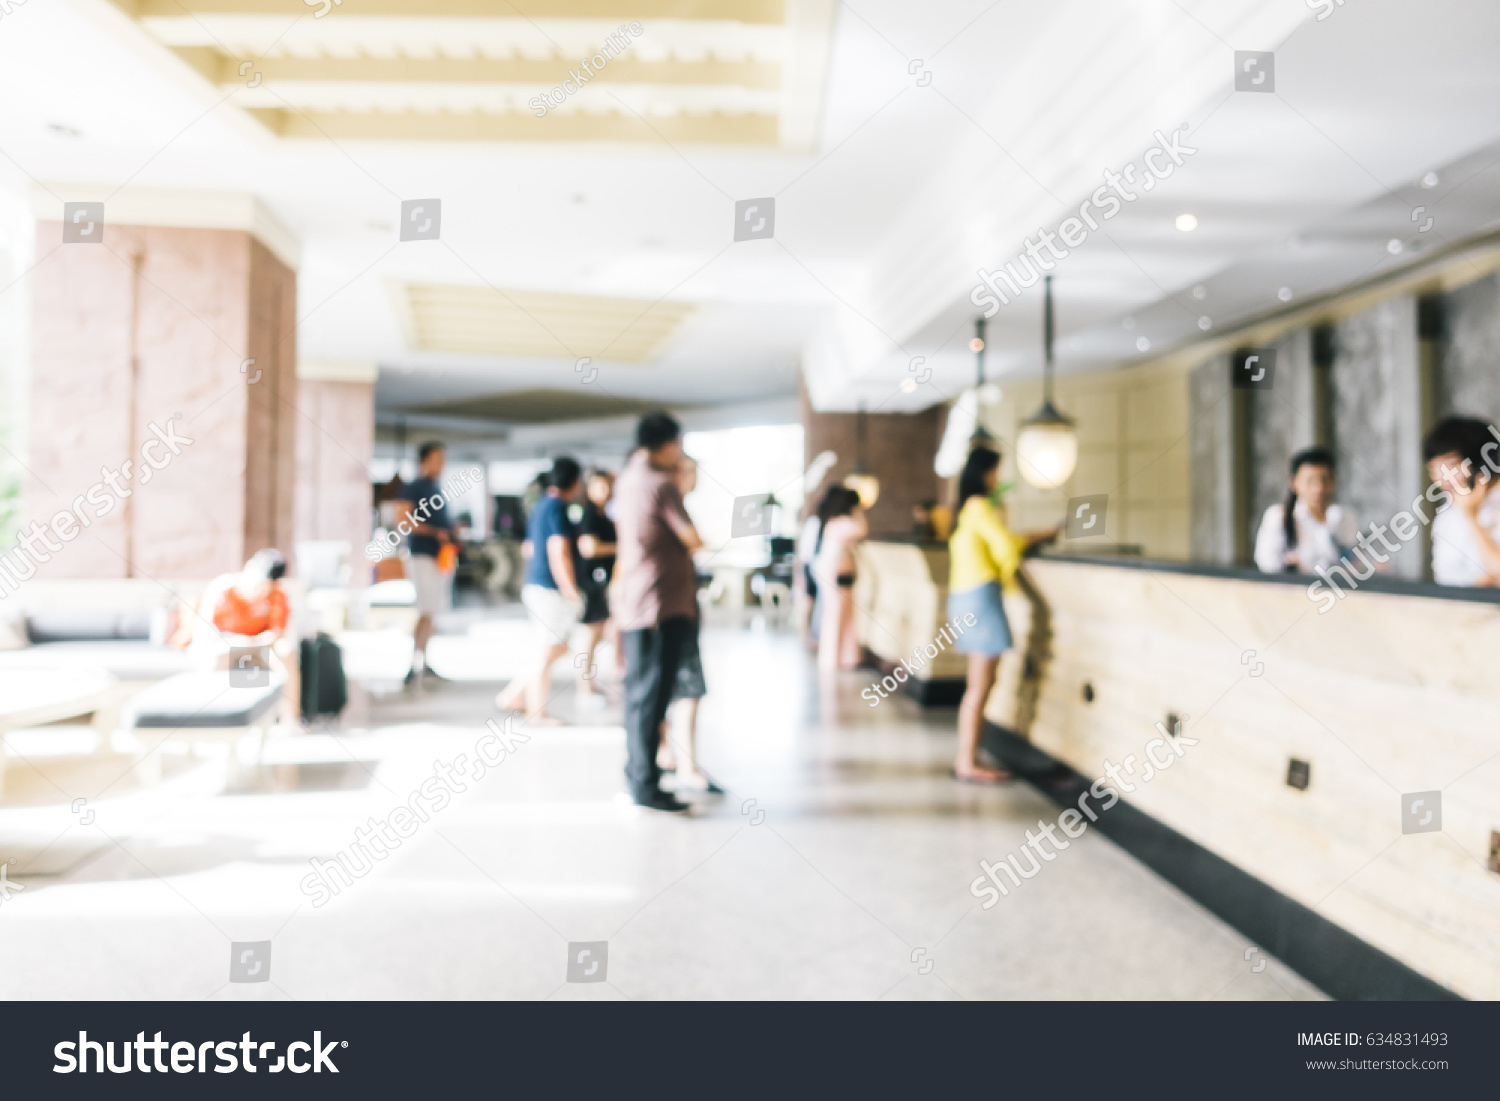 Abstract blur and defocused lobby in hotel interior for background - Vintage light Filter #634831493